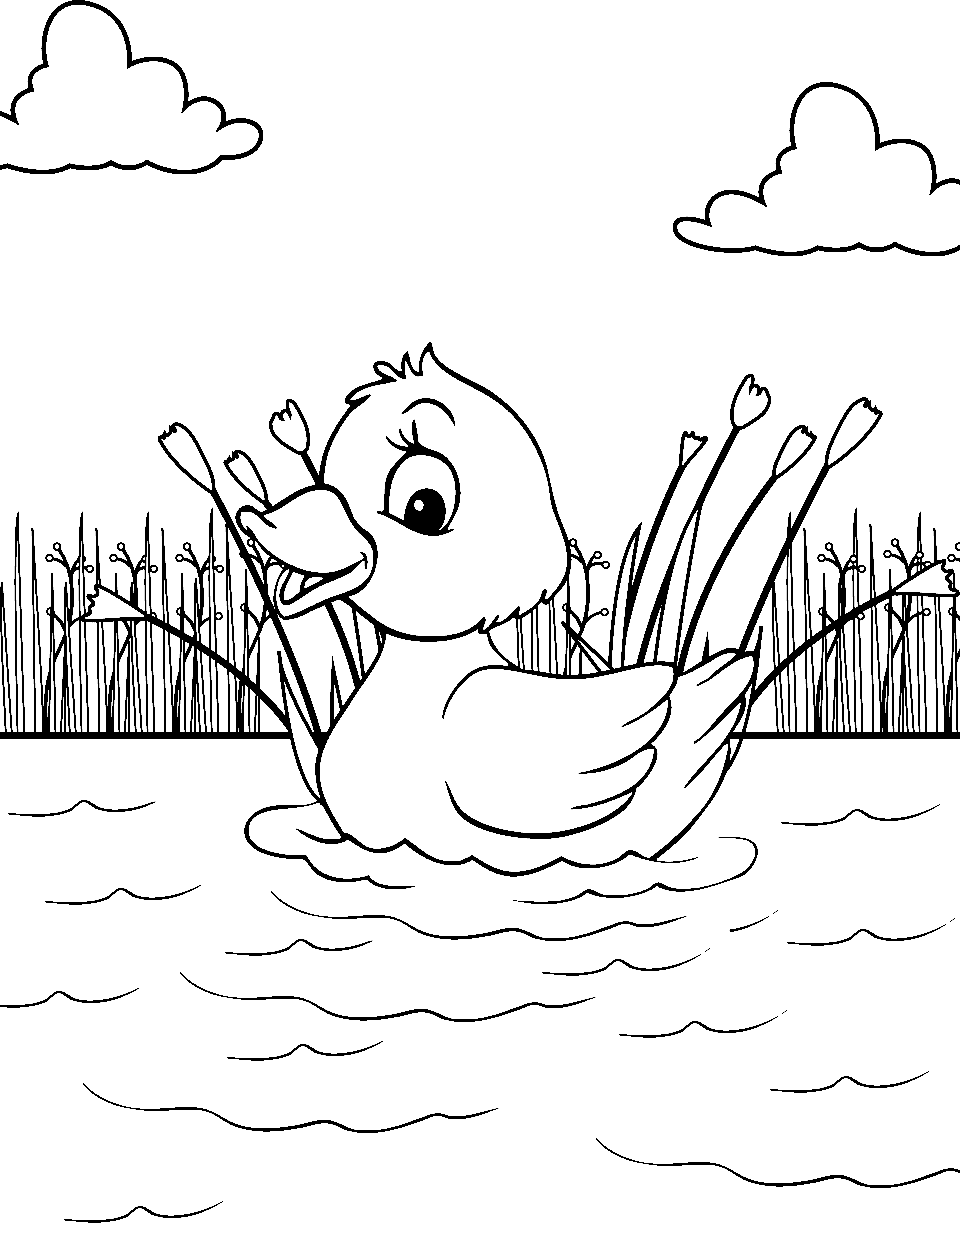 Ducky Delight Coloring Page - A duck swimming in a small pond.